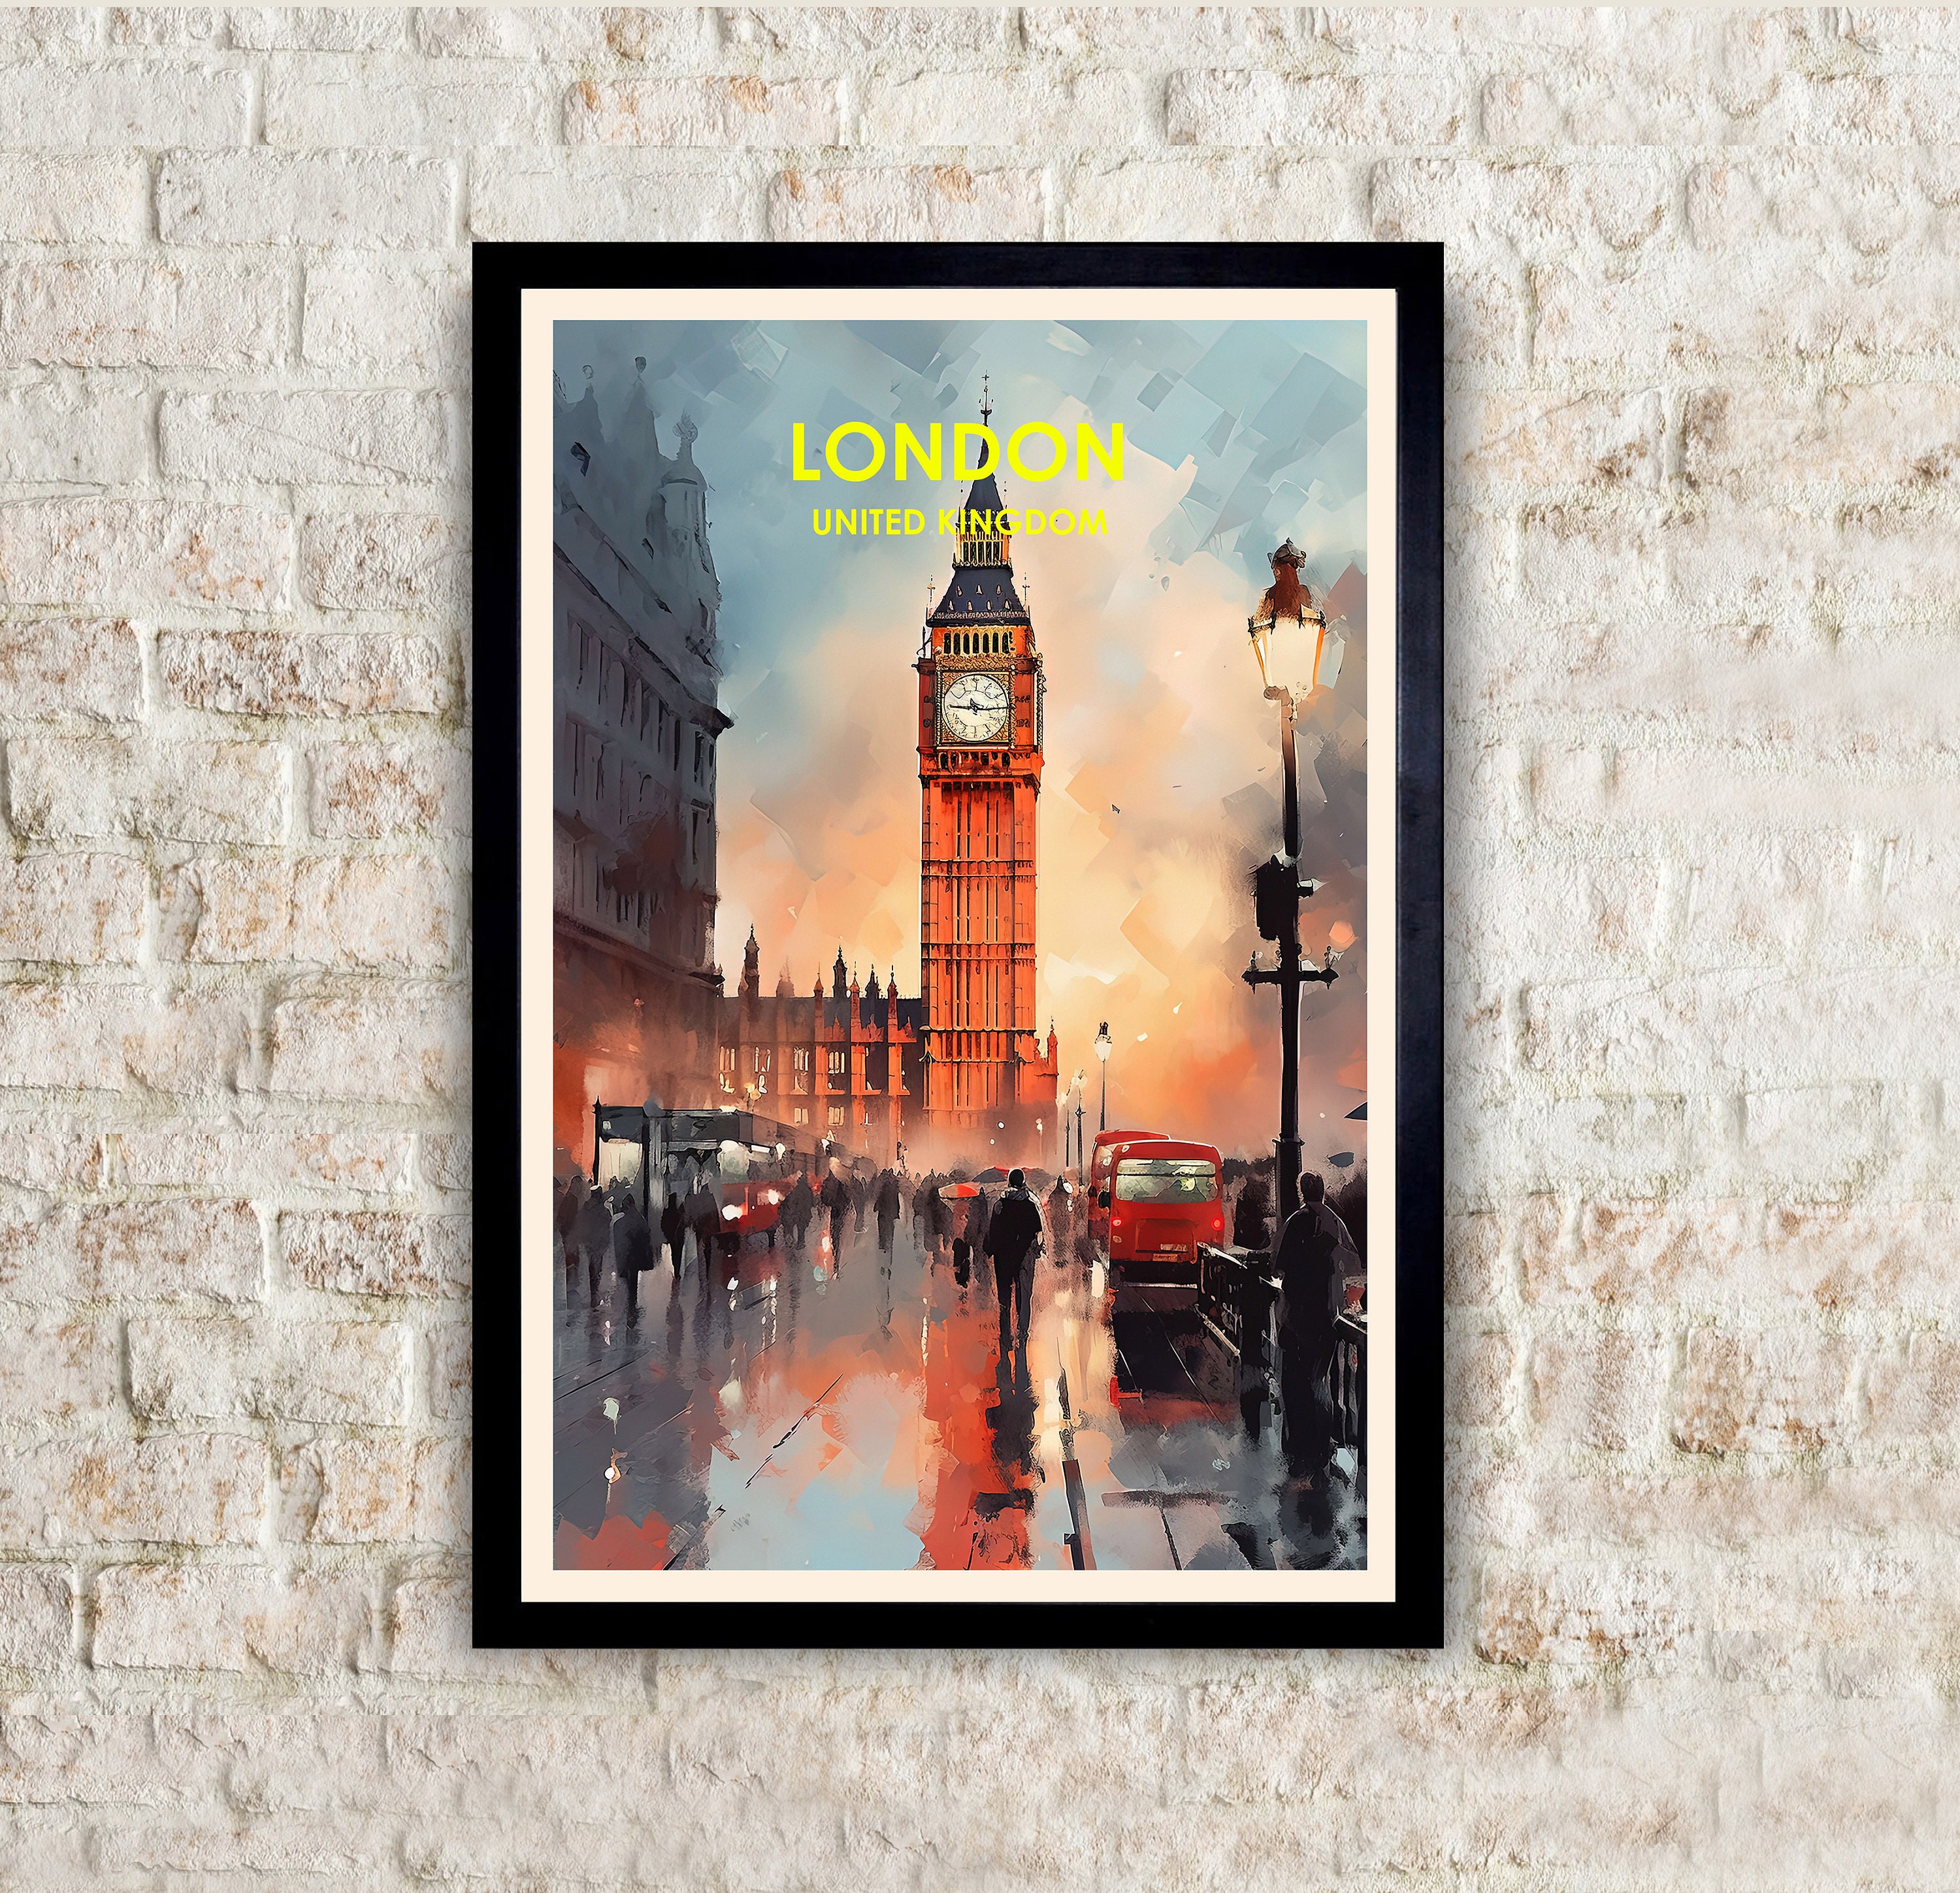 Discover London Poster, England Poster, London Print, London Painting, Watercolor Painting, Minimalist Art, Travel Posters, No Frame